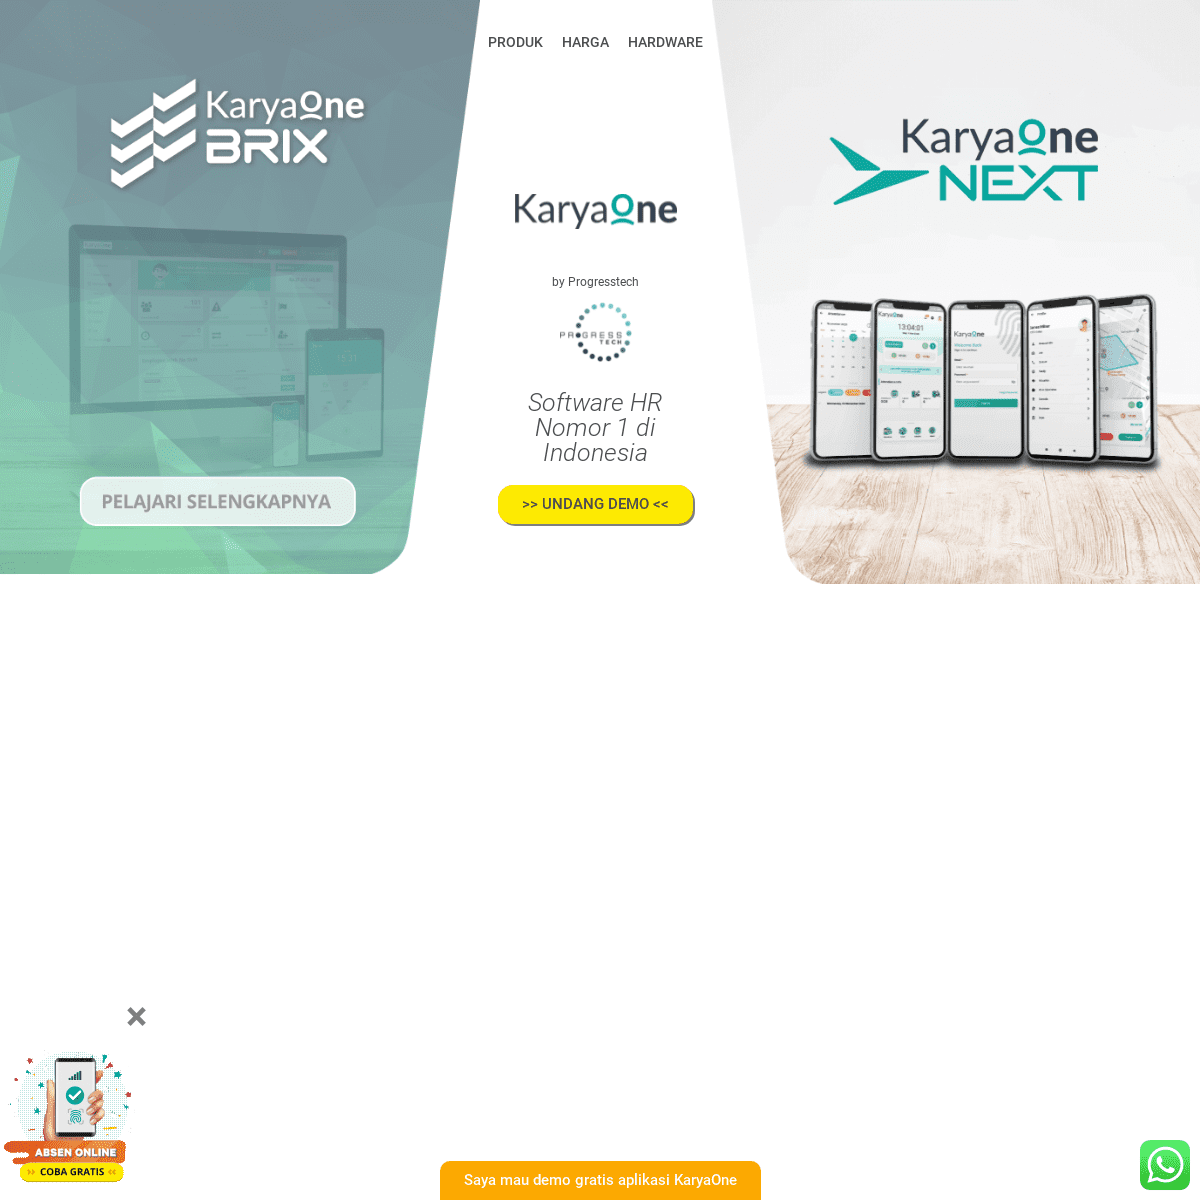 A complete backup of https://karyaone.co.id